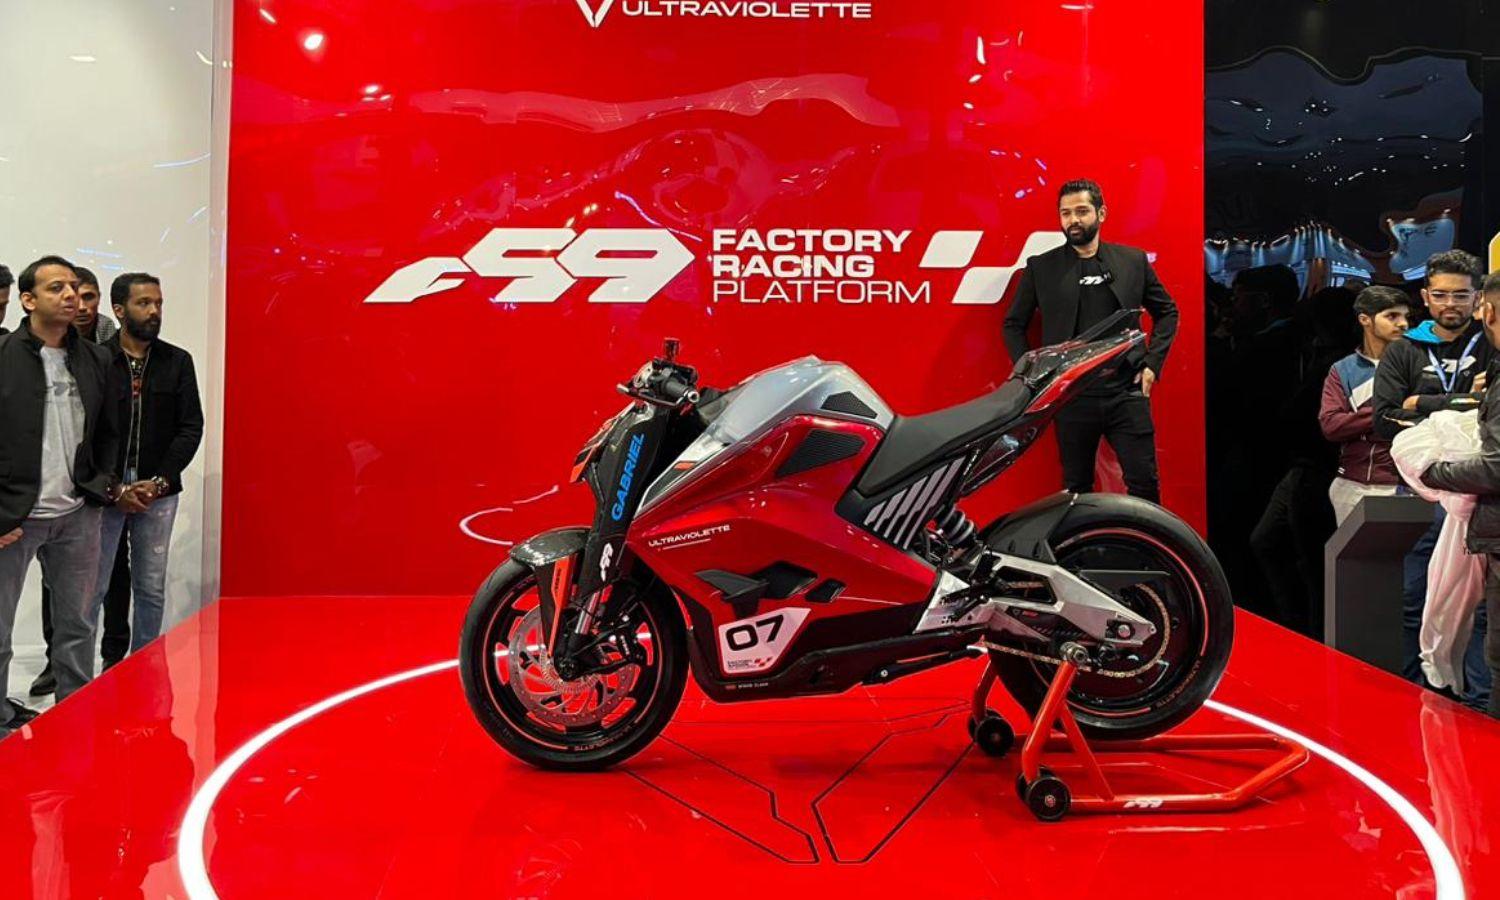 Ultraviolette took the wraps off the F99 Factory Racing Platform, which is a high-performance customisable electric motorcycle meant specifically for racing.